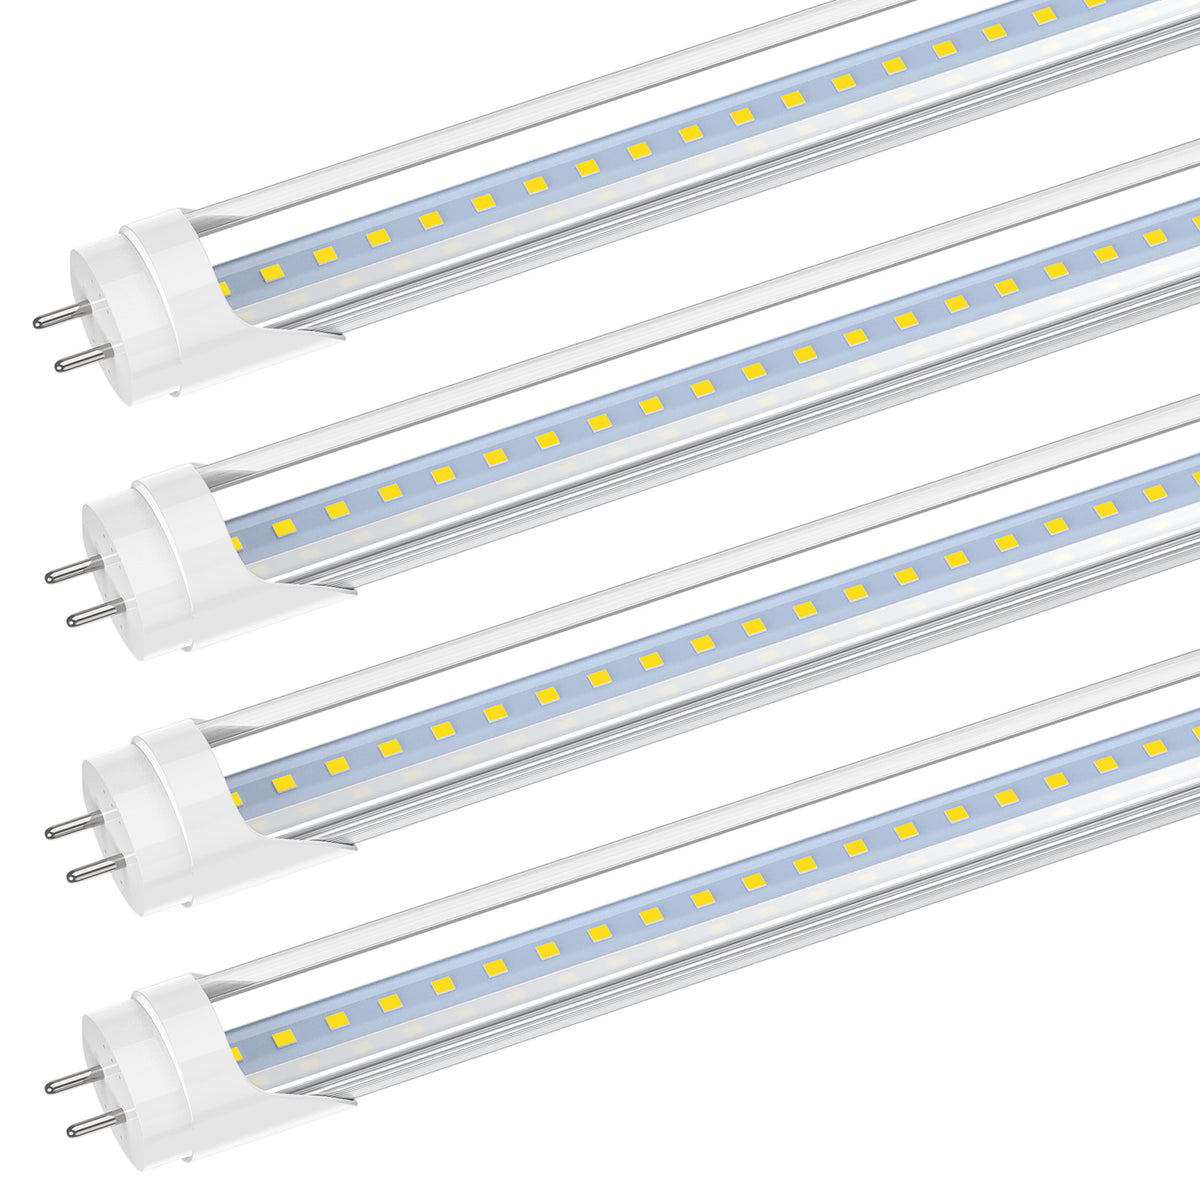 4ft 18w T8 LED Tube Light G13 6500K Fluorescent Replace Bulb ( Bi Pin) -  Clear Cover - DLC Approved